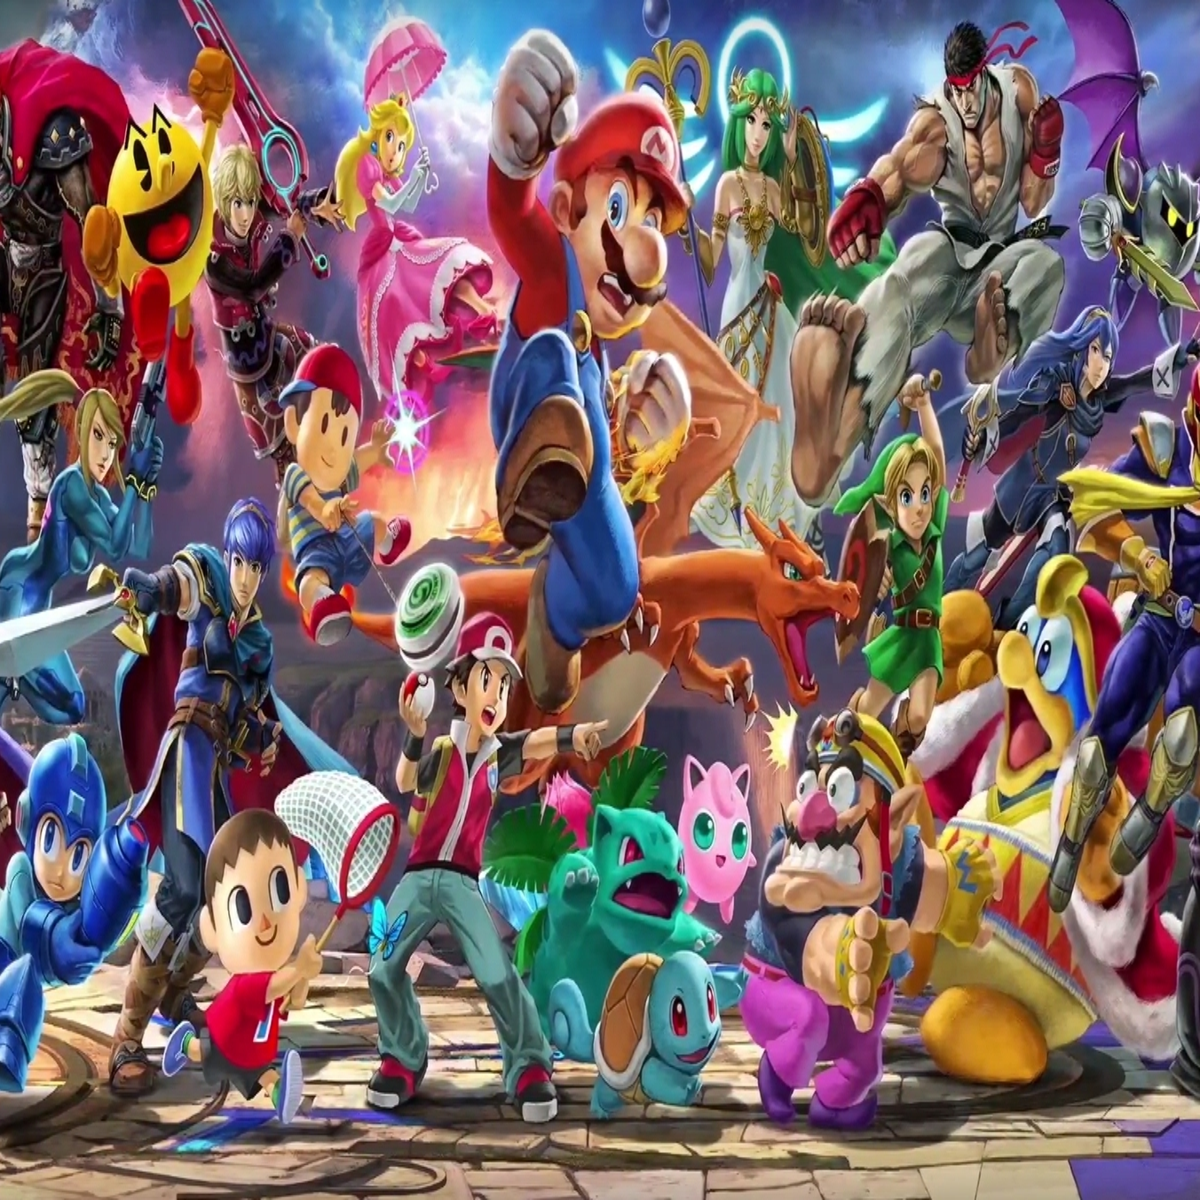 Super Smash Bros. Ultimate review - a messy, magical festival of